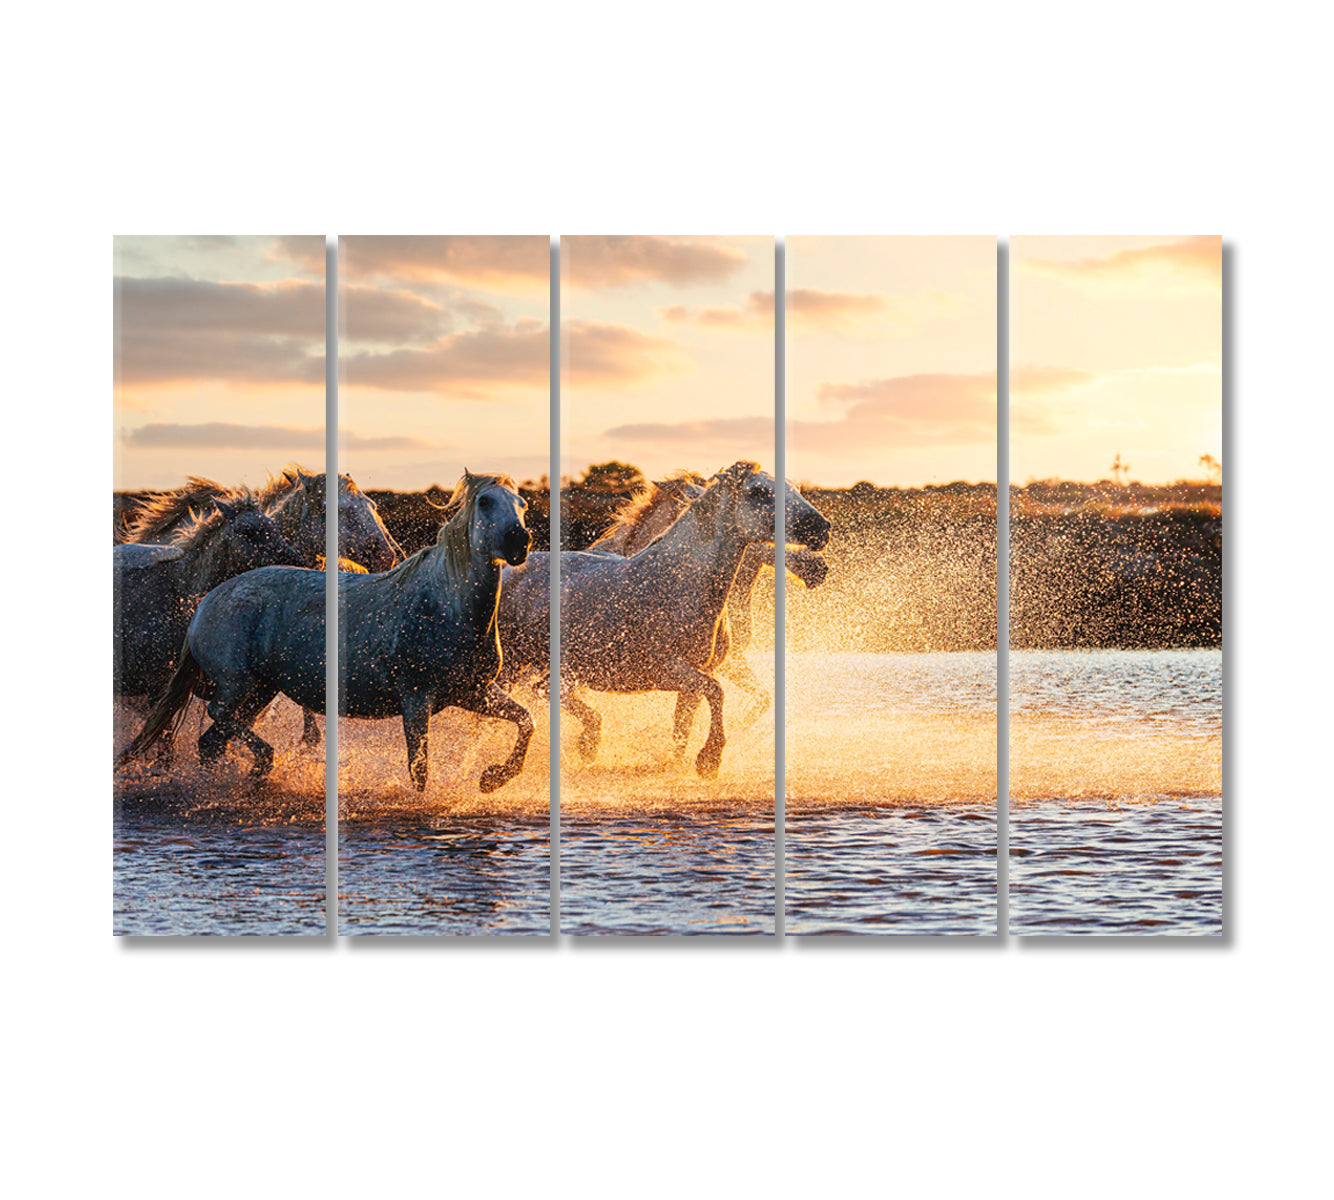 Wild White Horses of Camargue Running on Water Canvas Print-Canvas Print-CetArt-5 Panels-36x24 inches-CetArt